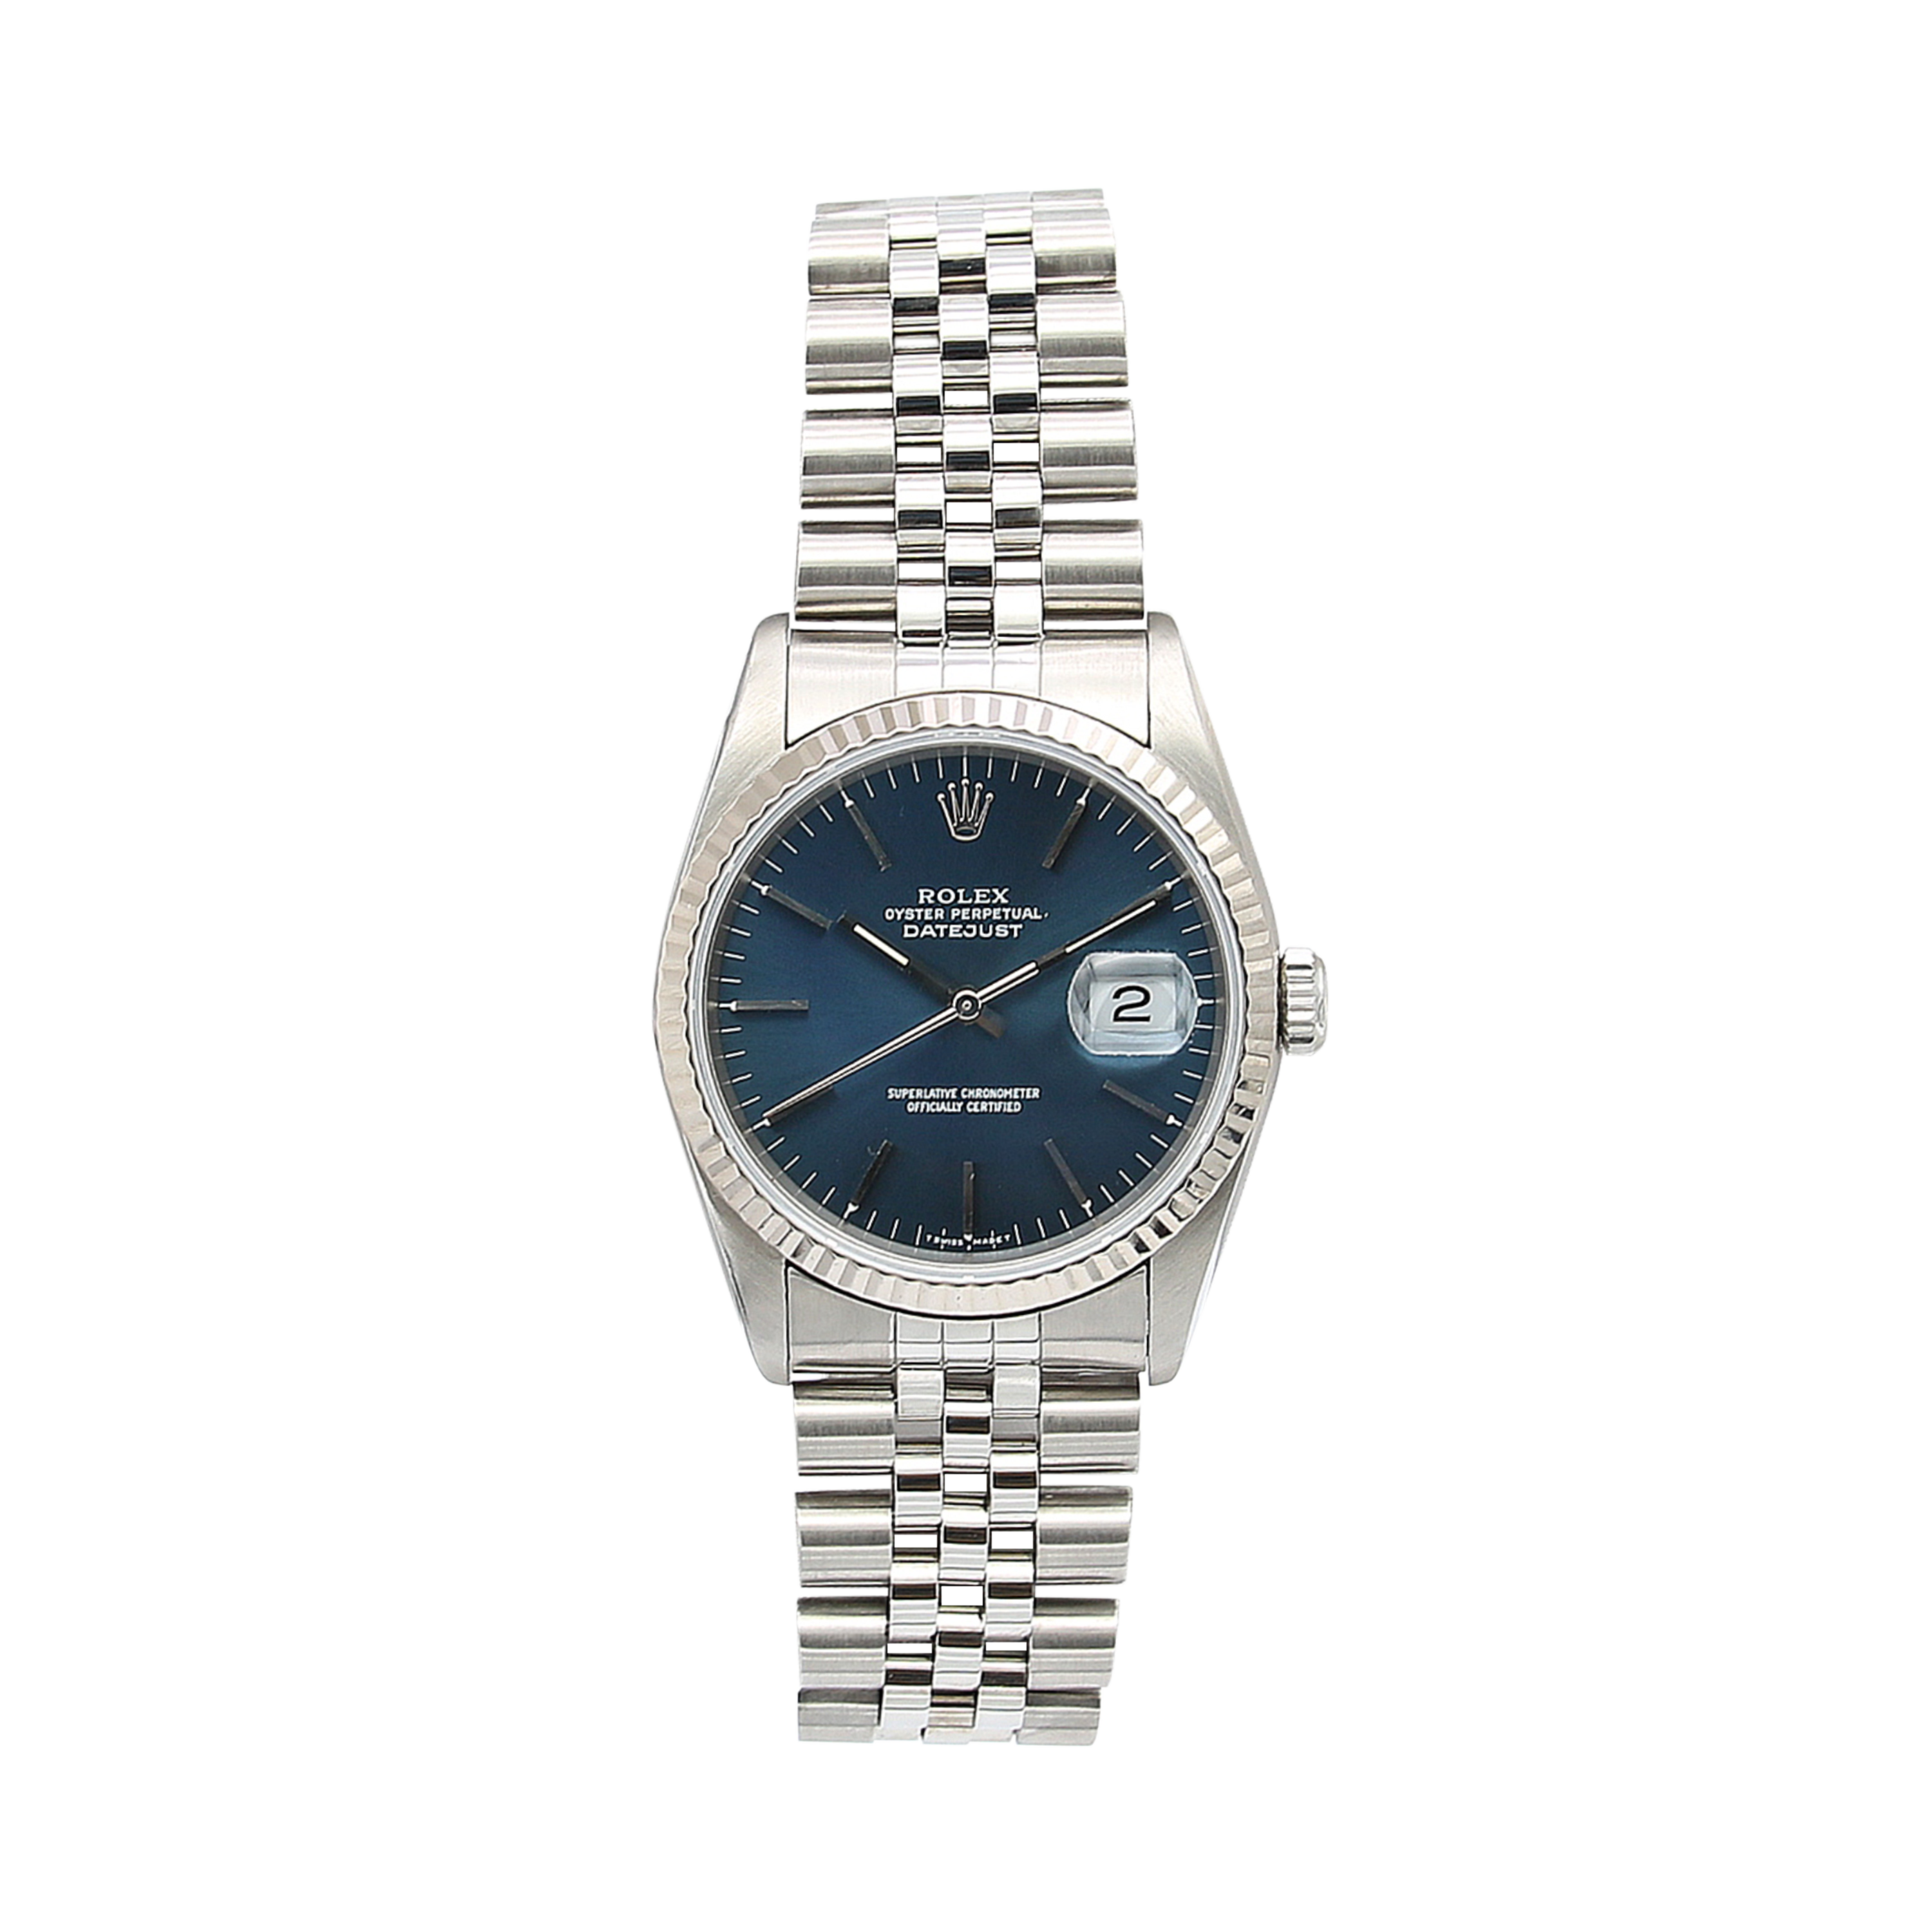 Rolex Datejust 36 ref. 16234 Blue Soleil Dial - With Watches Sp. z o.o